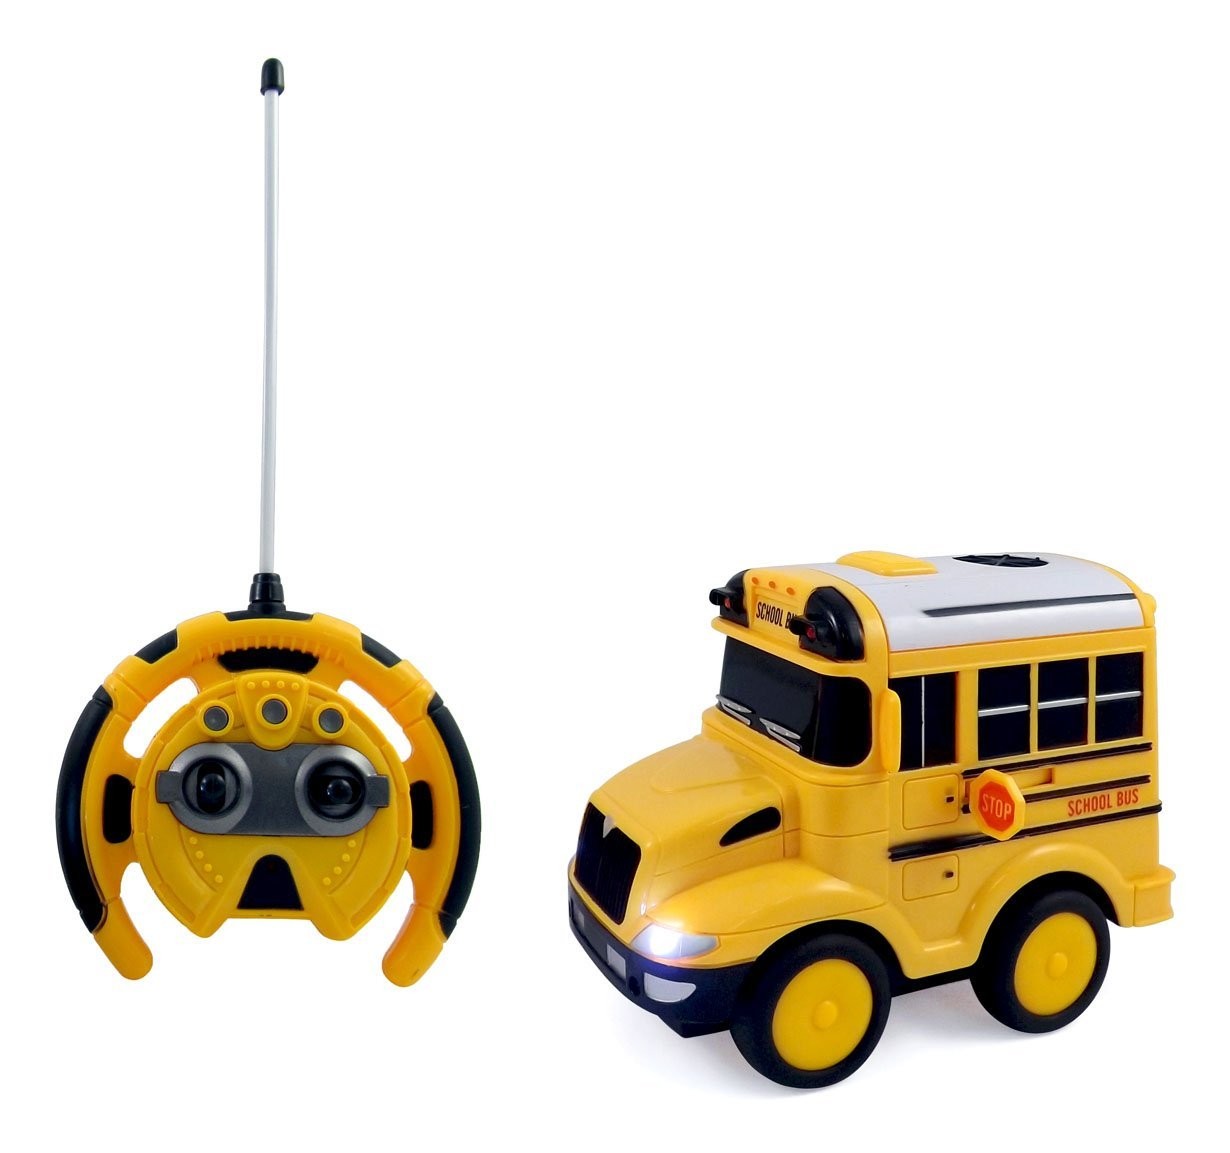 School Bus RC Toy Car For Kids With Steering Wheel Remote, Lights and Sounds